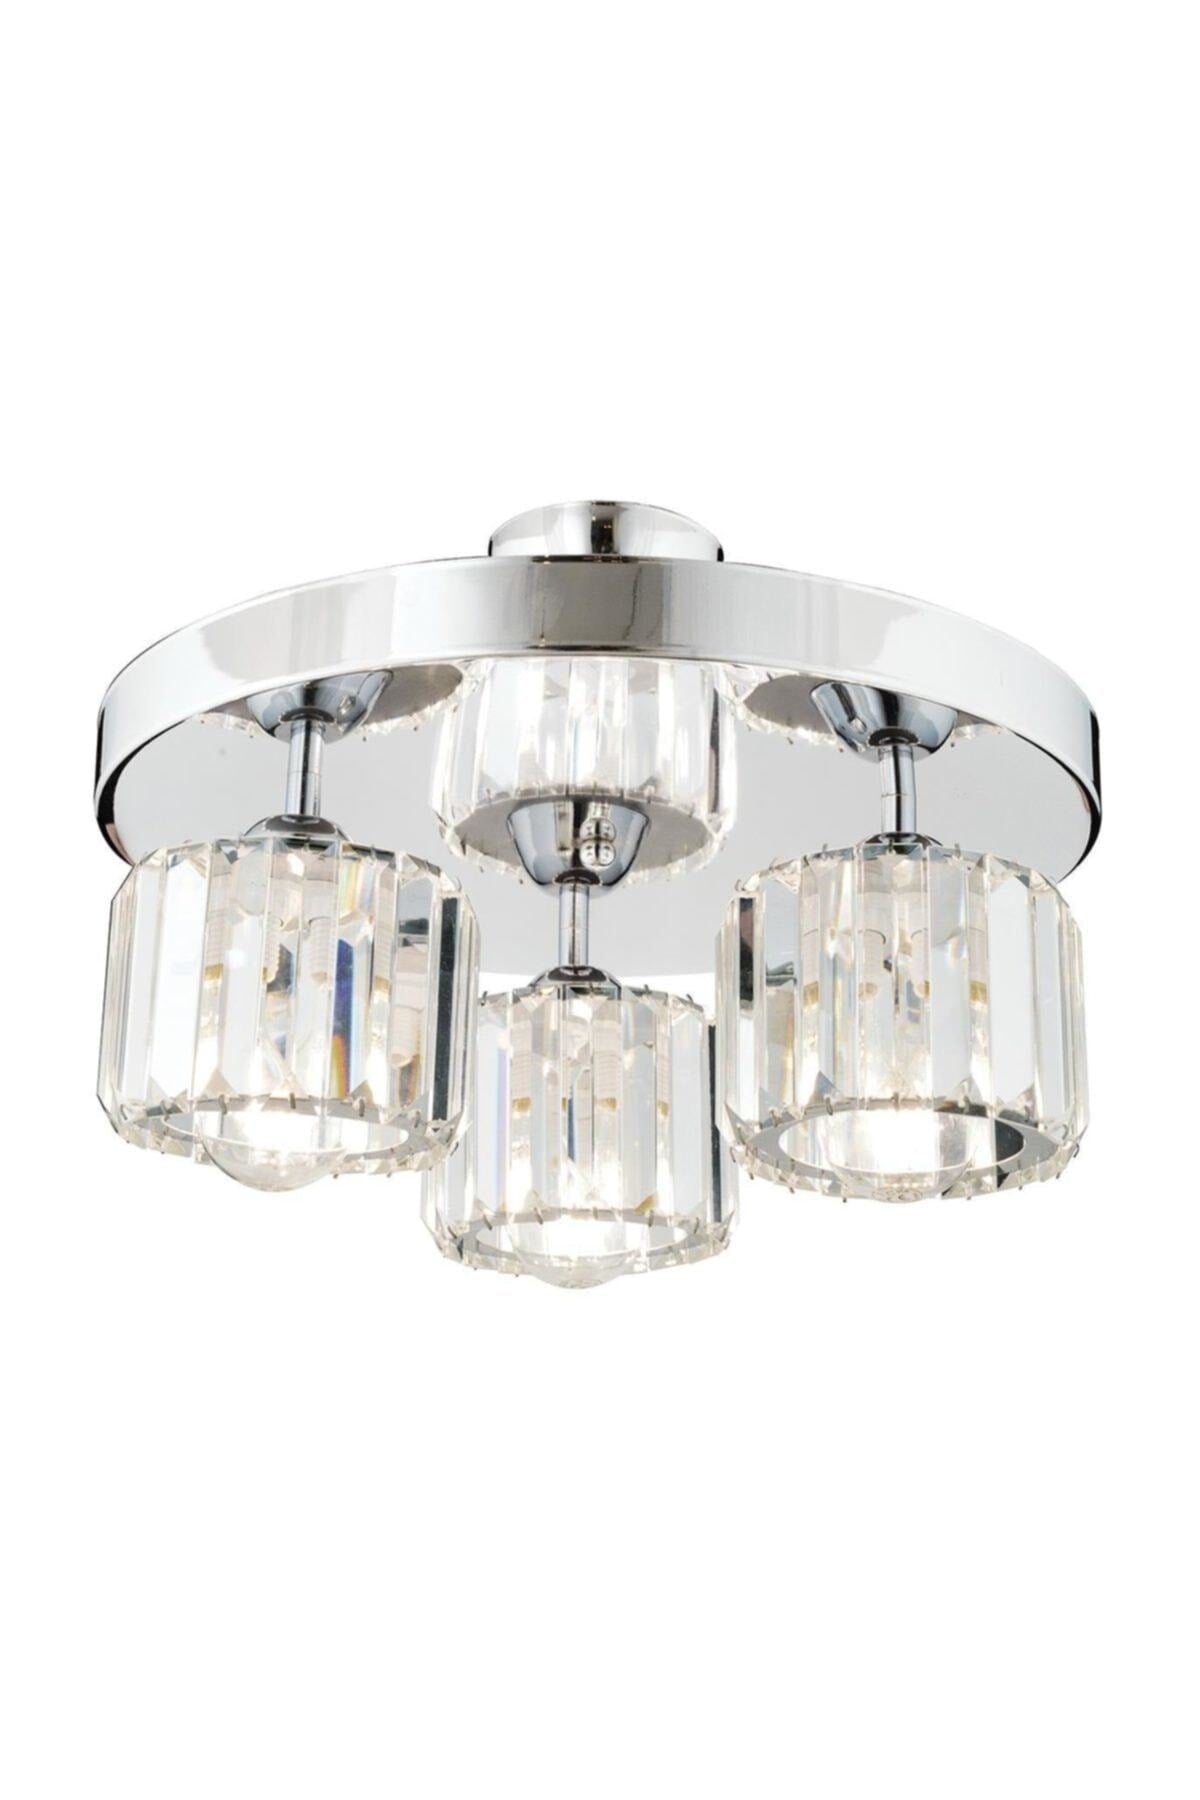 Sabrina 3 Piece Round Chrome Plated Plafonier with Crystal and Stone Modern Design Crystal Living Room Chandelier